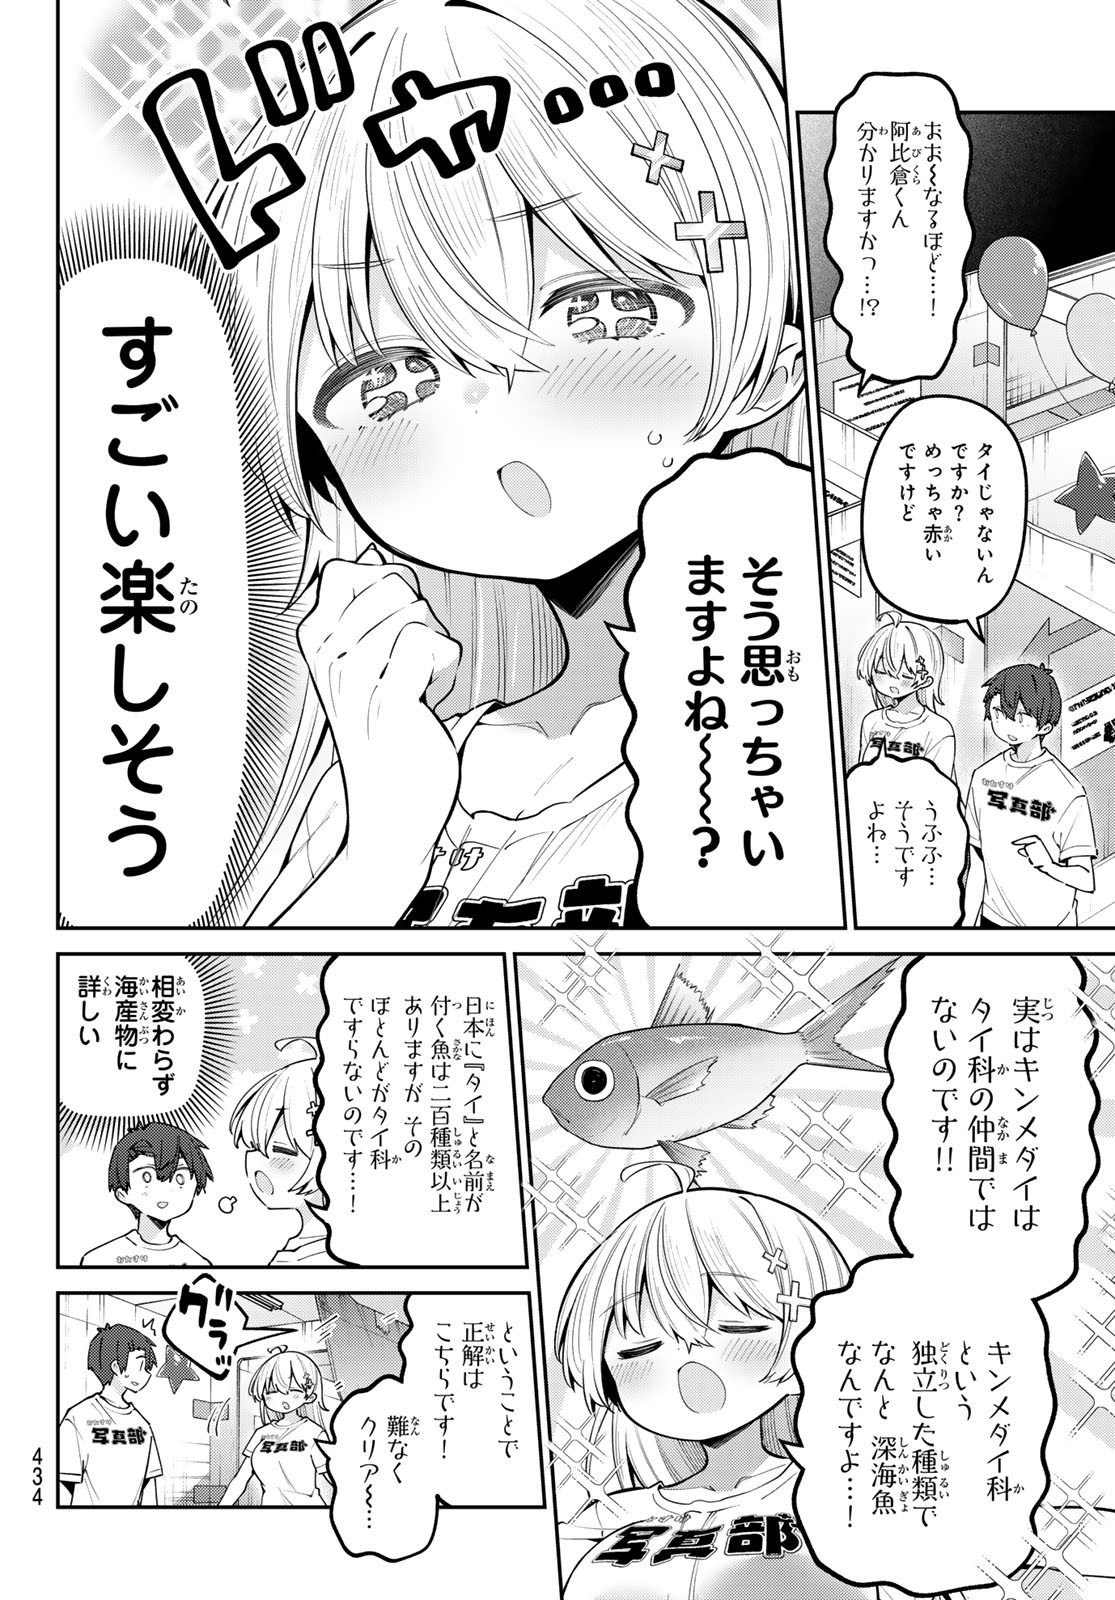 Weekly Shōnen Magazine - 週刊少年マガジン - Chapter 2024-33 - Page 432